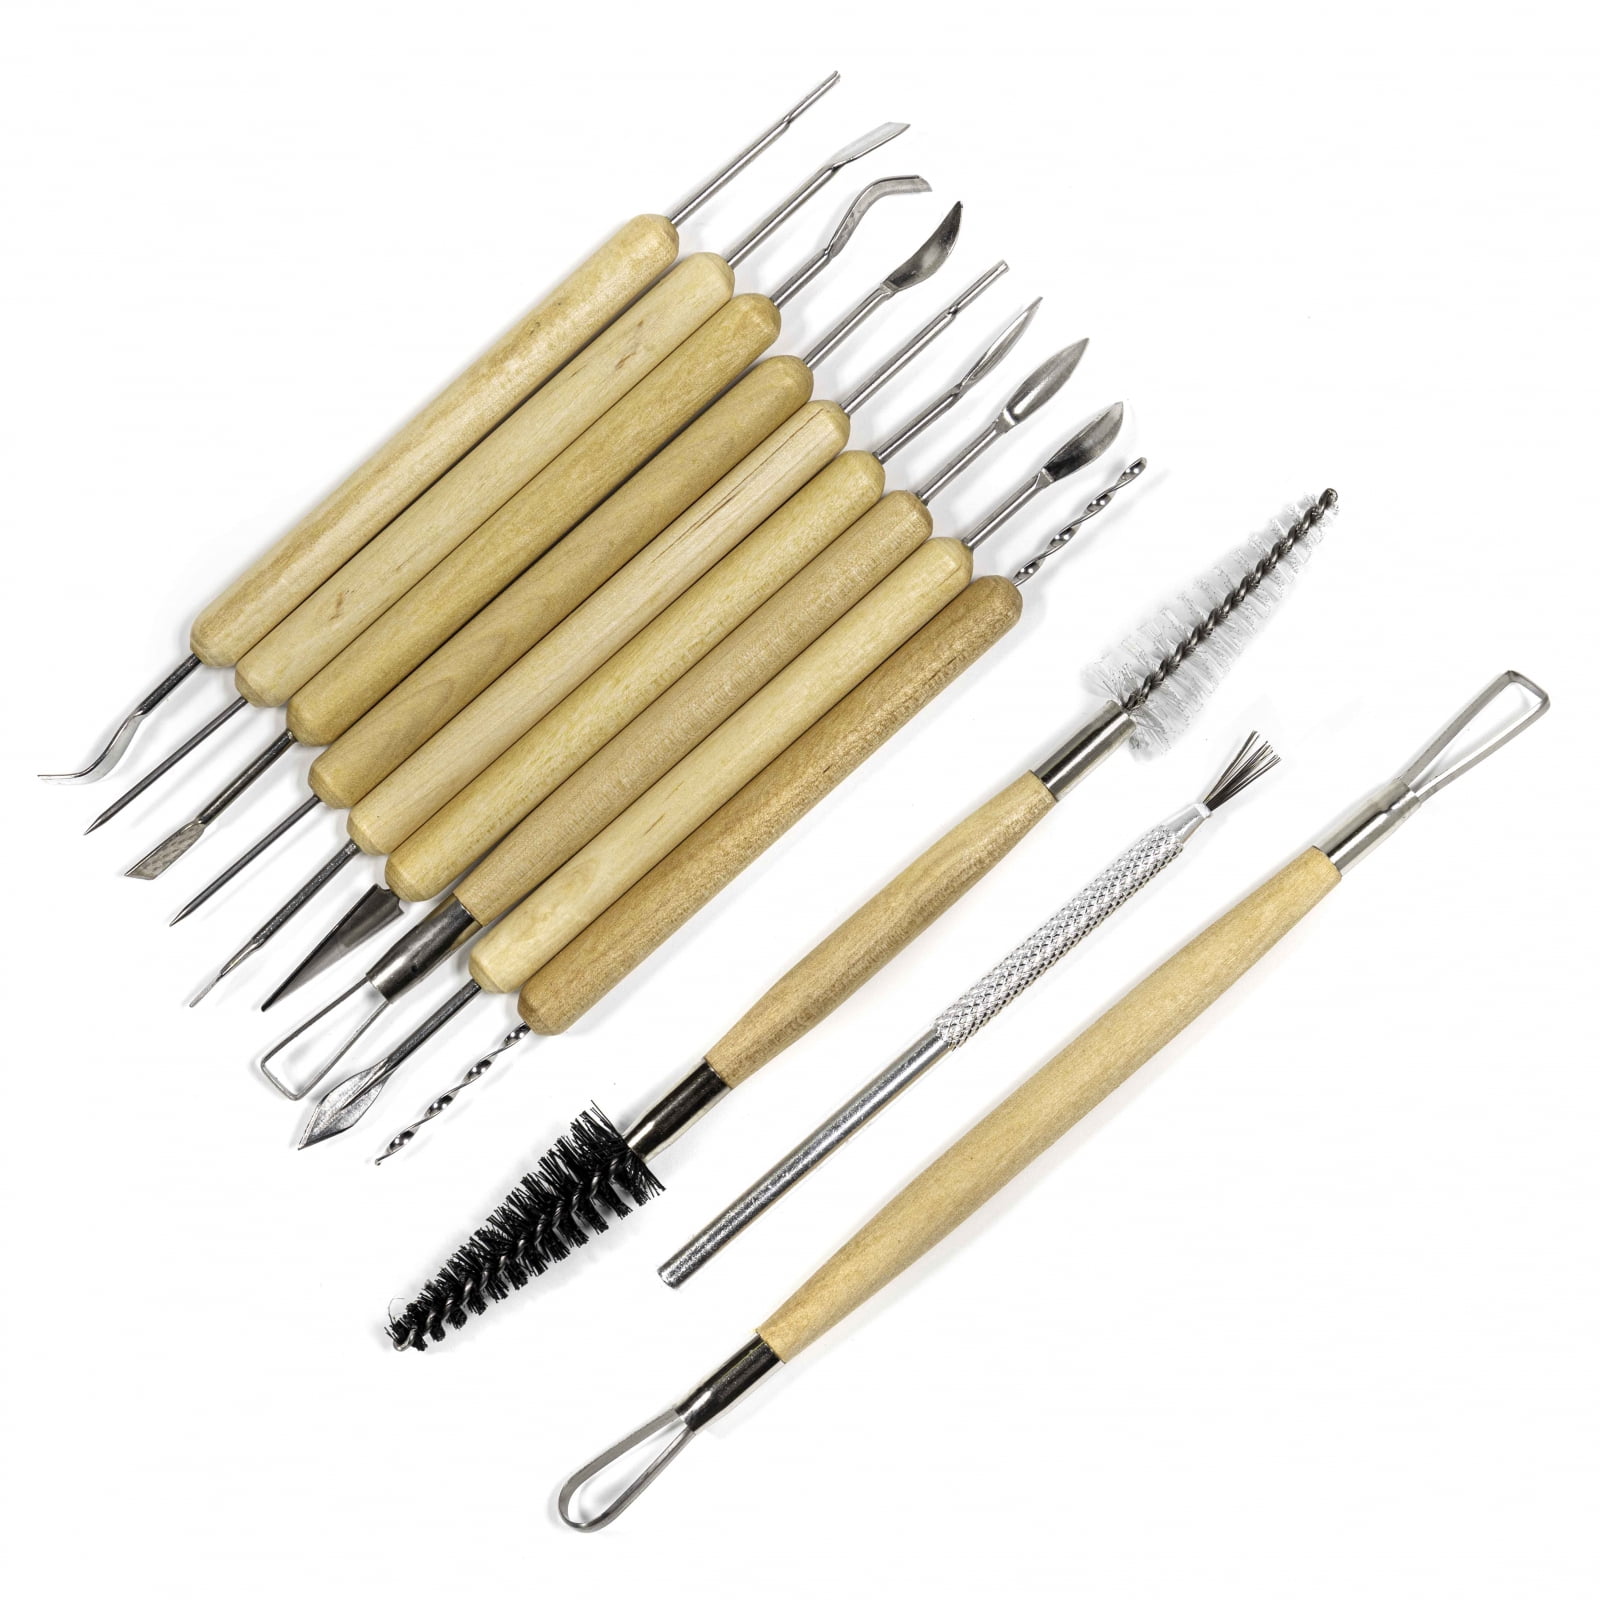 Pottery Clay Sculpting Tools, 22pcs Wooden Handle Pottery Carving Tools & Metal Scraper & Plastic Clay Shaping Tools, Men's, Size: One size, Brown